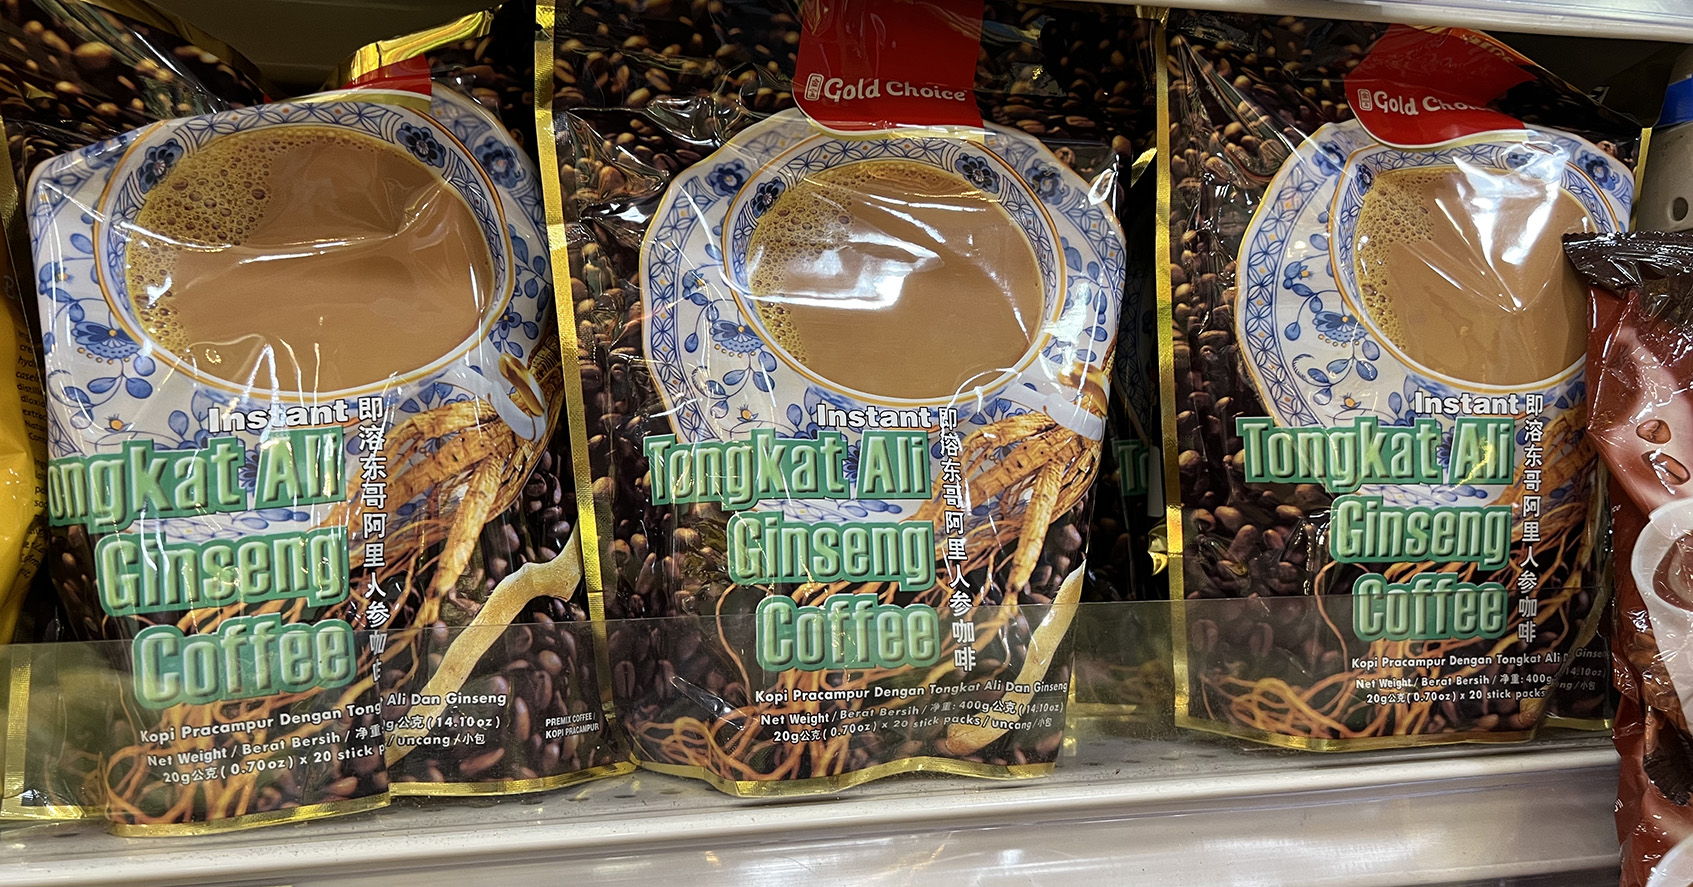 Ginseng coffee - Seafood City Supermarket in Irvine, California - Photo by Julie Nguyen